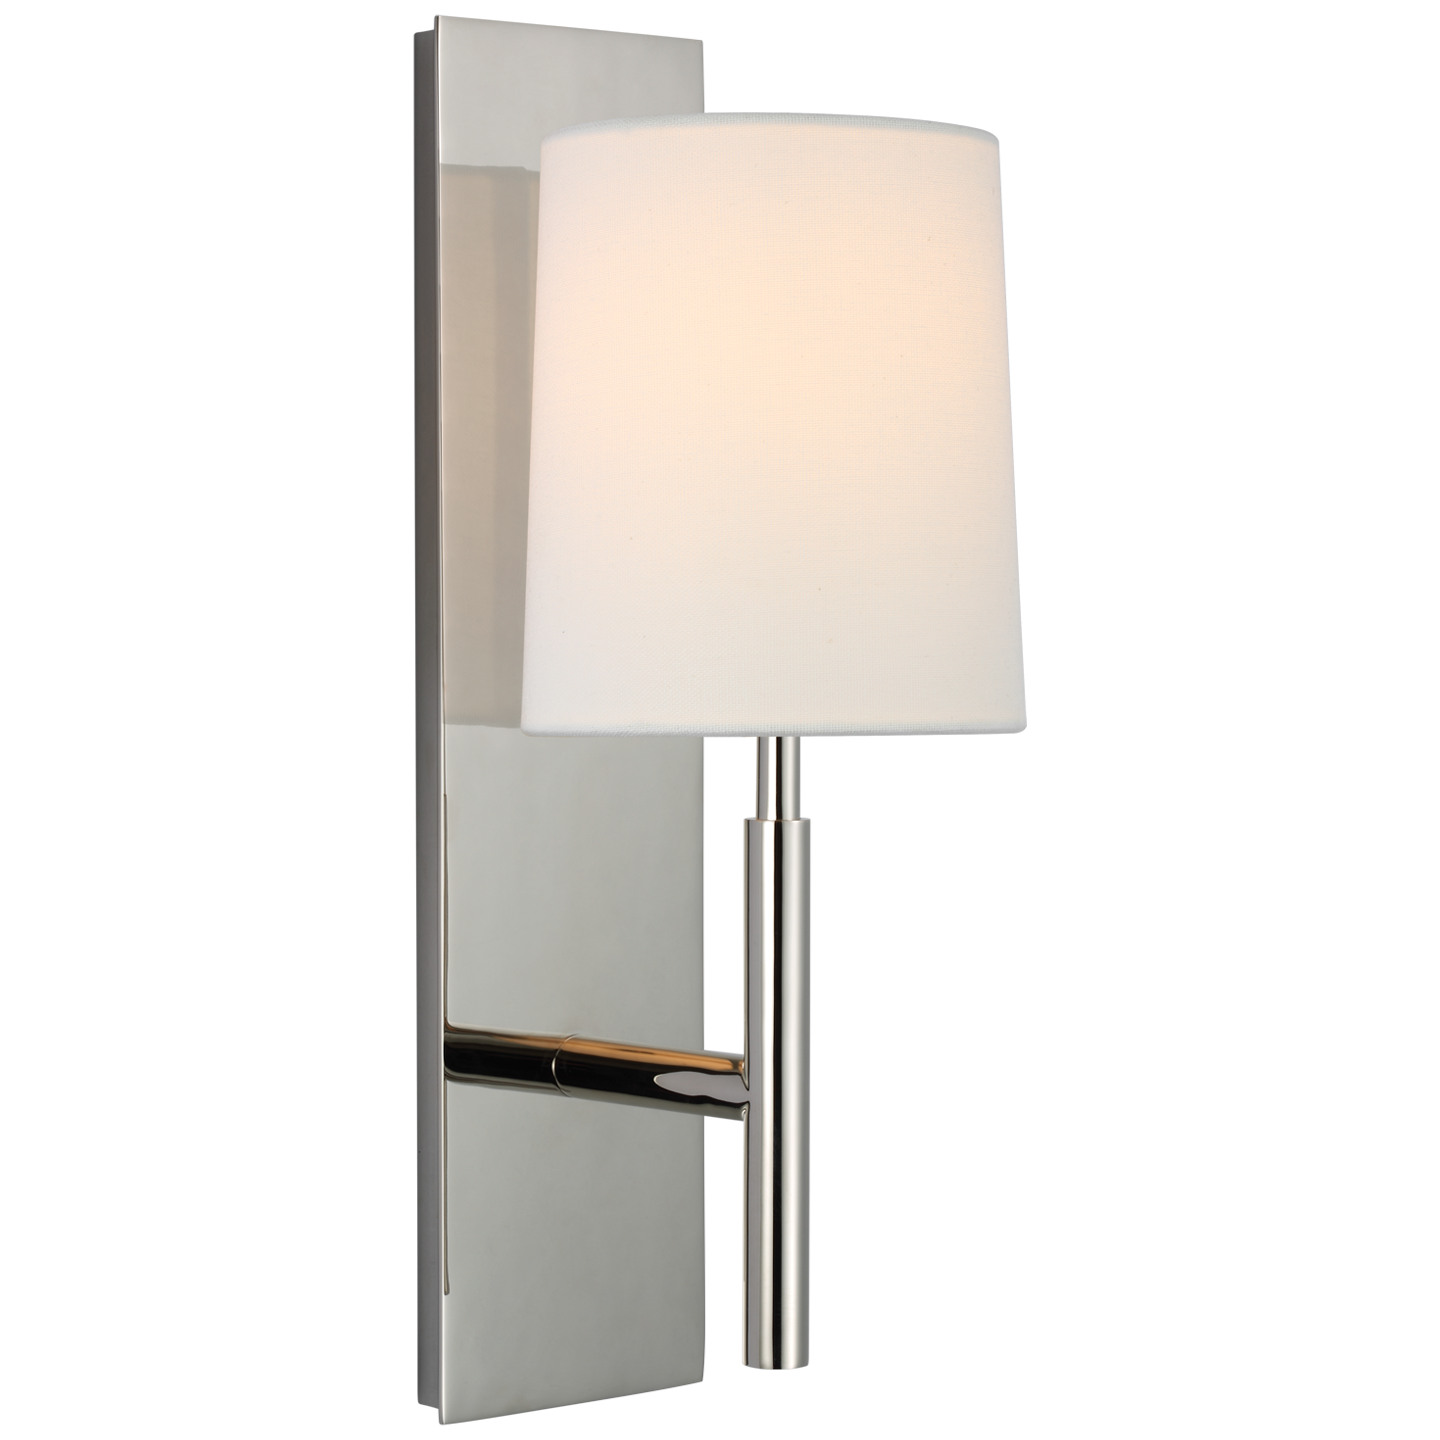 This Clarion Medium Sconce is so dreamy with the linen shade and thick back plate. We'd love to see these lined down a hallway or in a kitchen to complete the look.   Designer: Barbara Barry